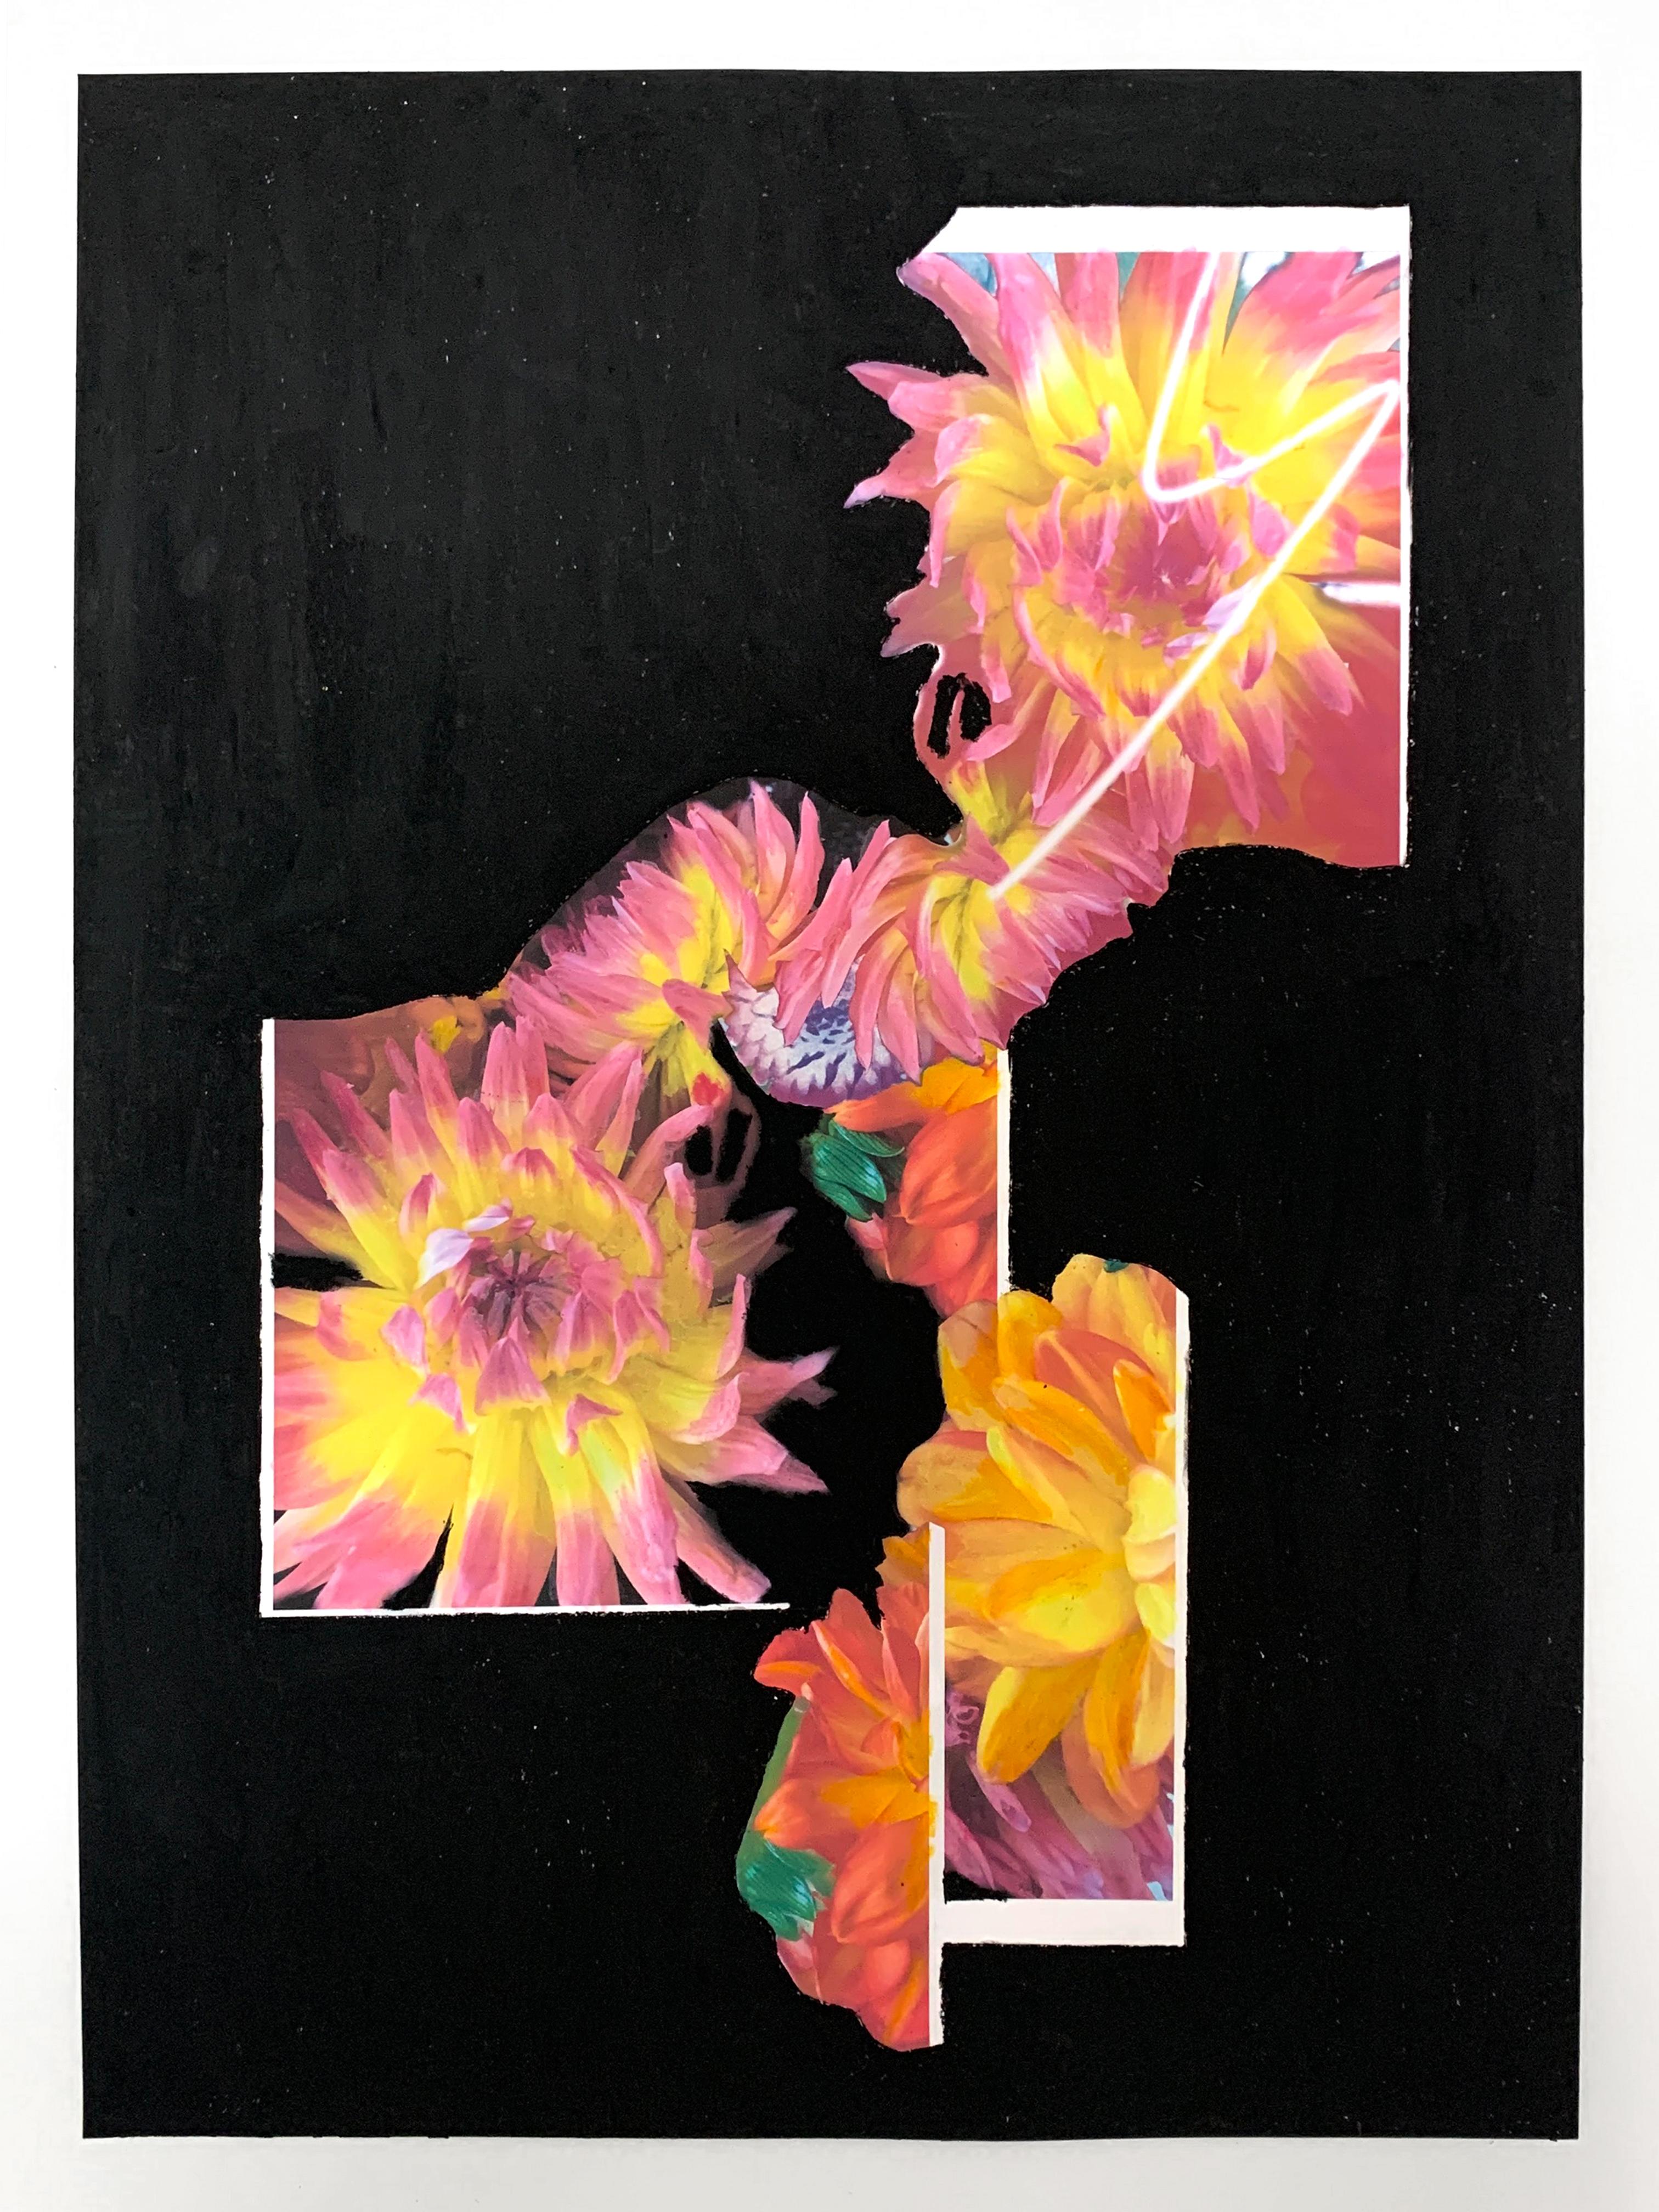 Still Life with Flowers 6, Collage on paper with oil pastels, 42 x 59.4 cm, 2021 - Mixed Media Art by Mandy Franca